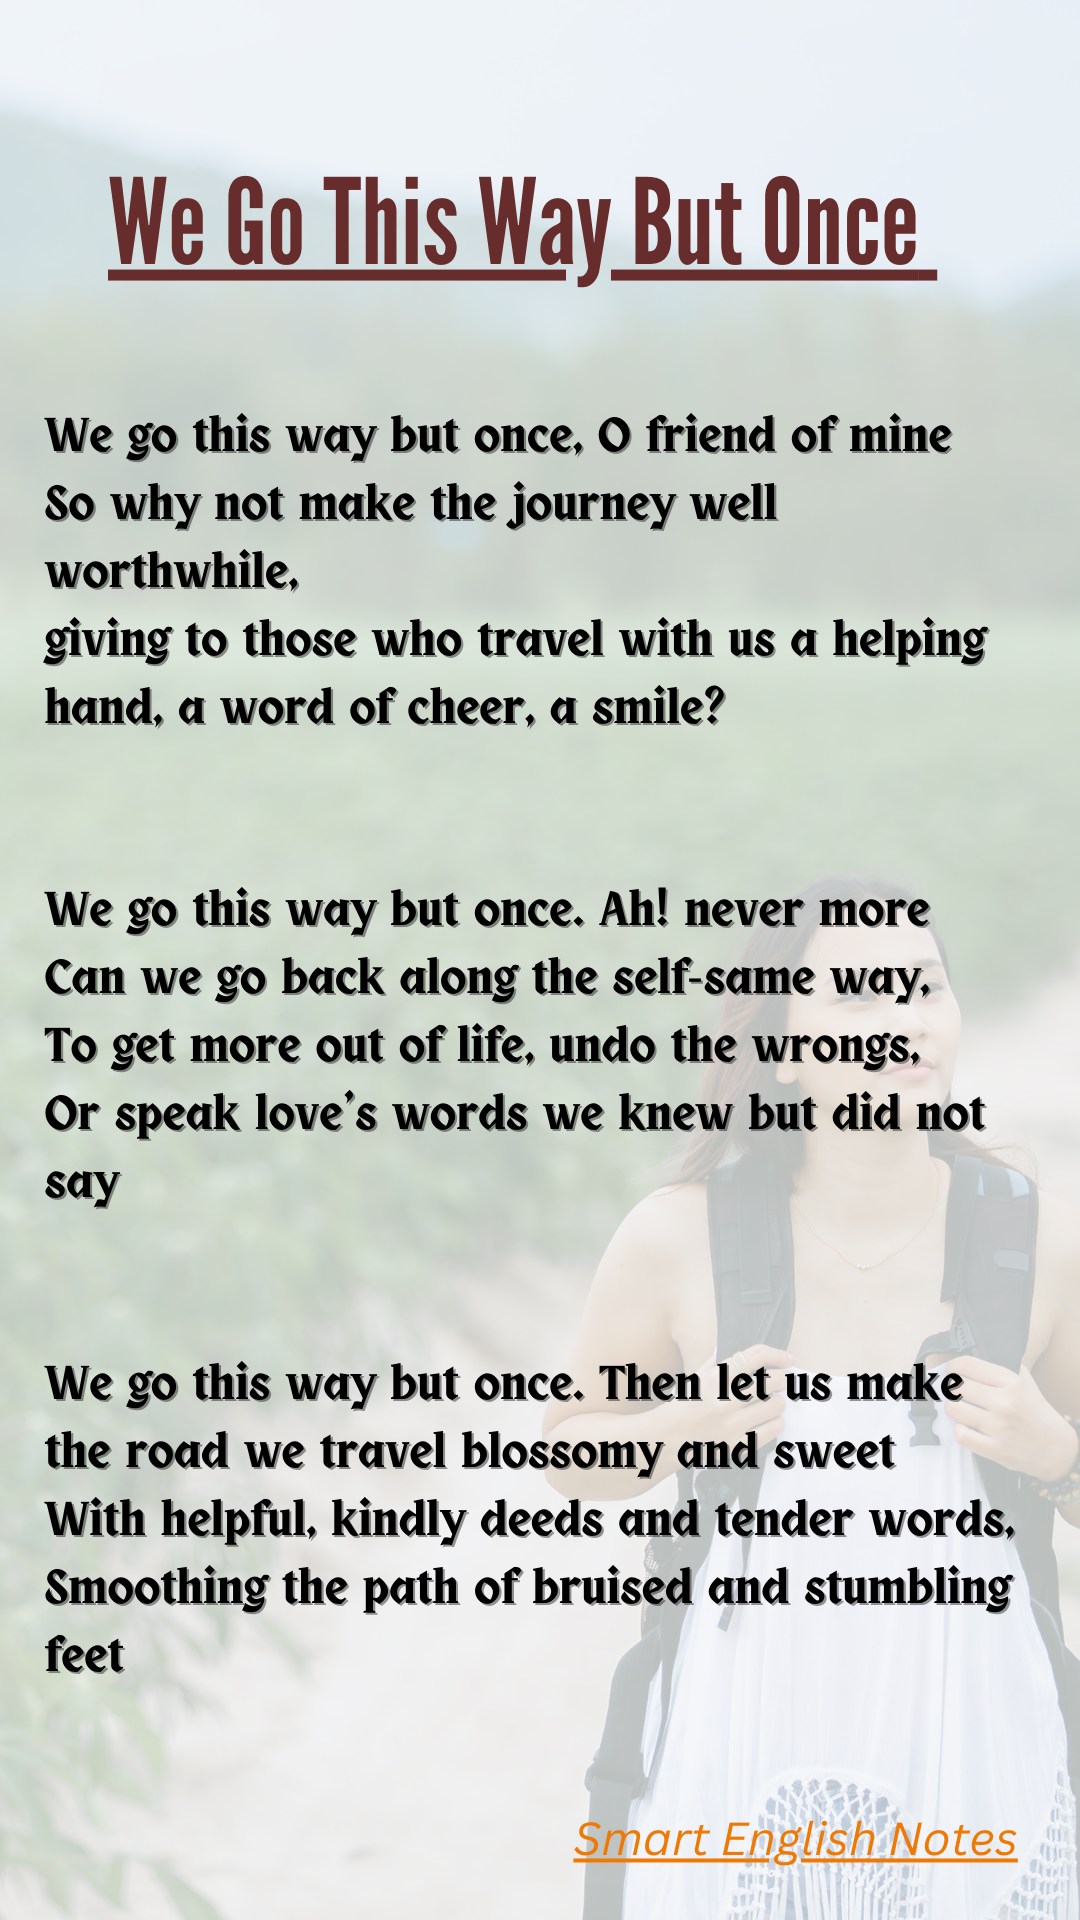 We Go This Way But Once Poem Summary 